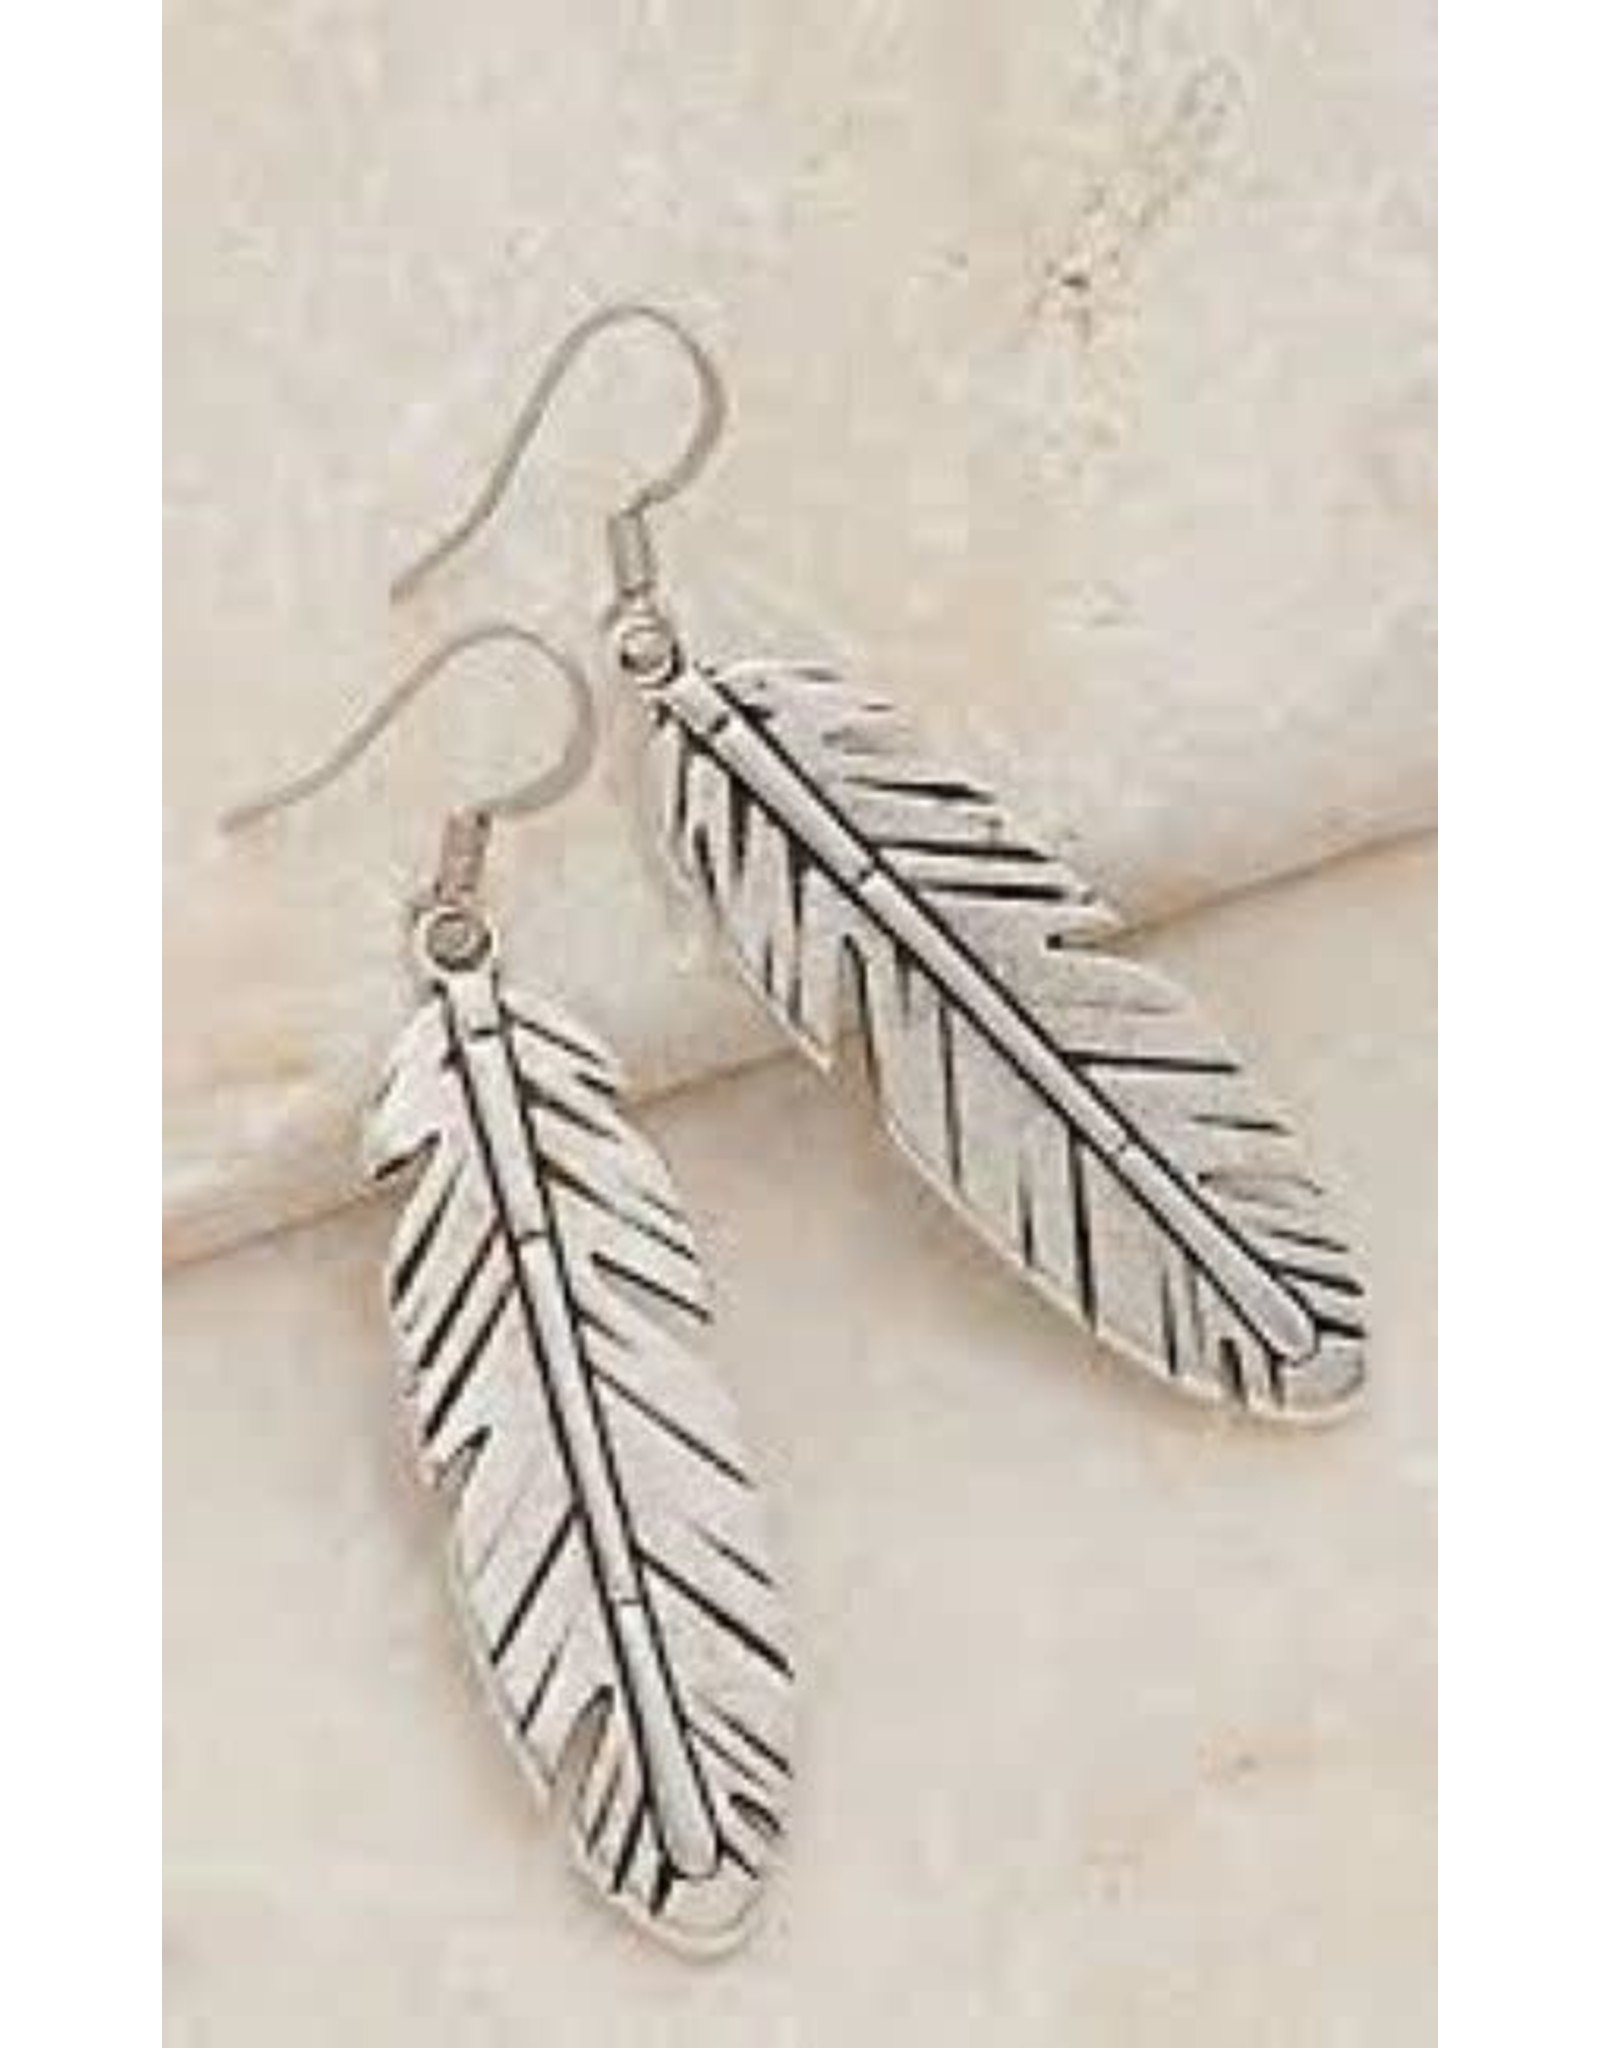 Stormy (Feather) Earrings